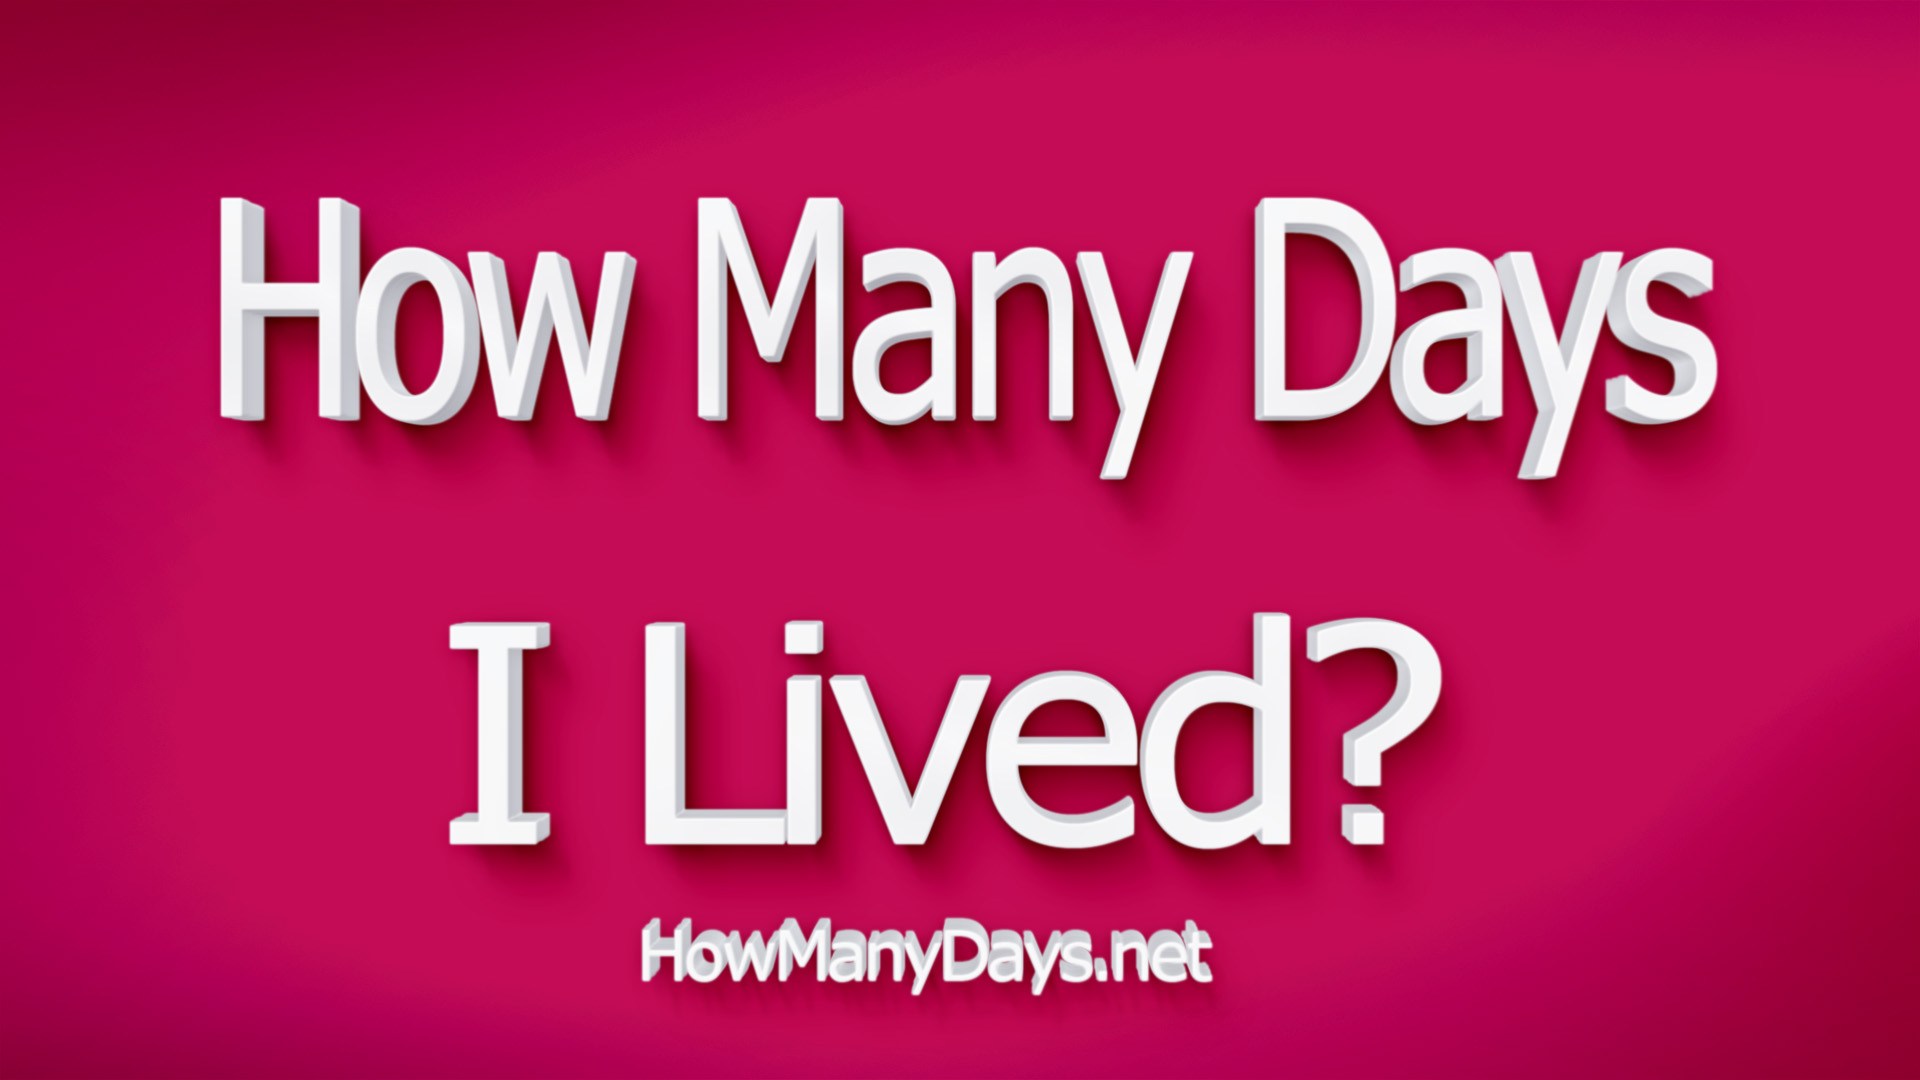 How Many Days Have i Lived? How many days have i been alive?